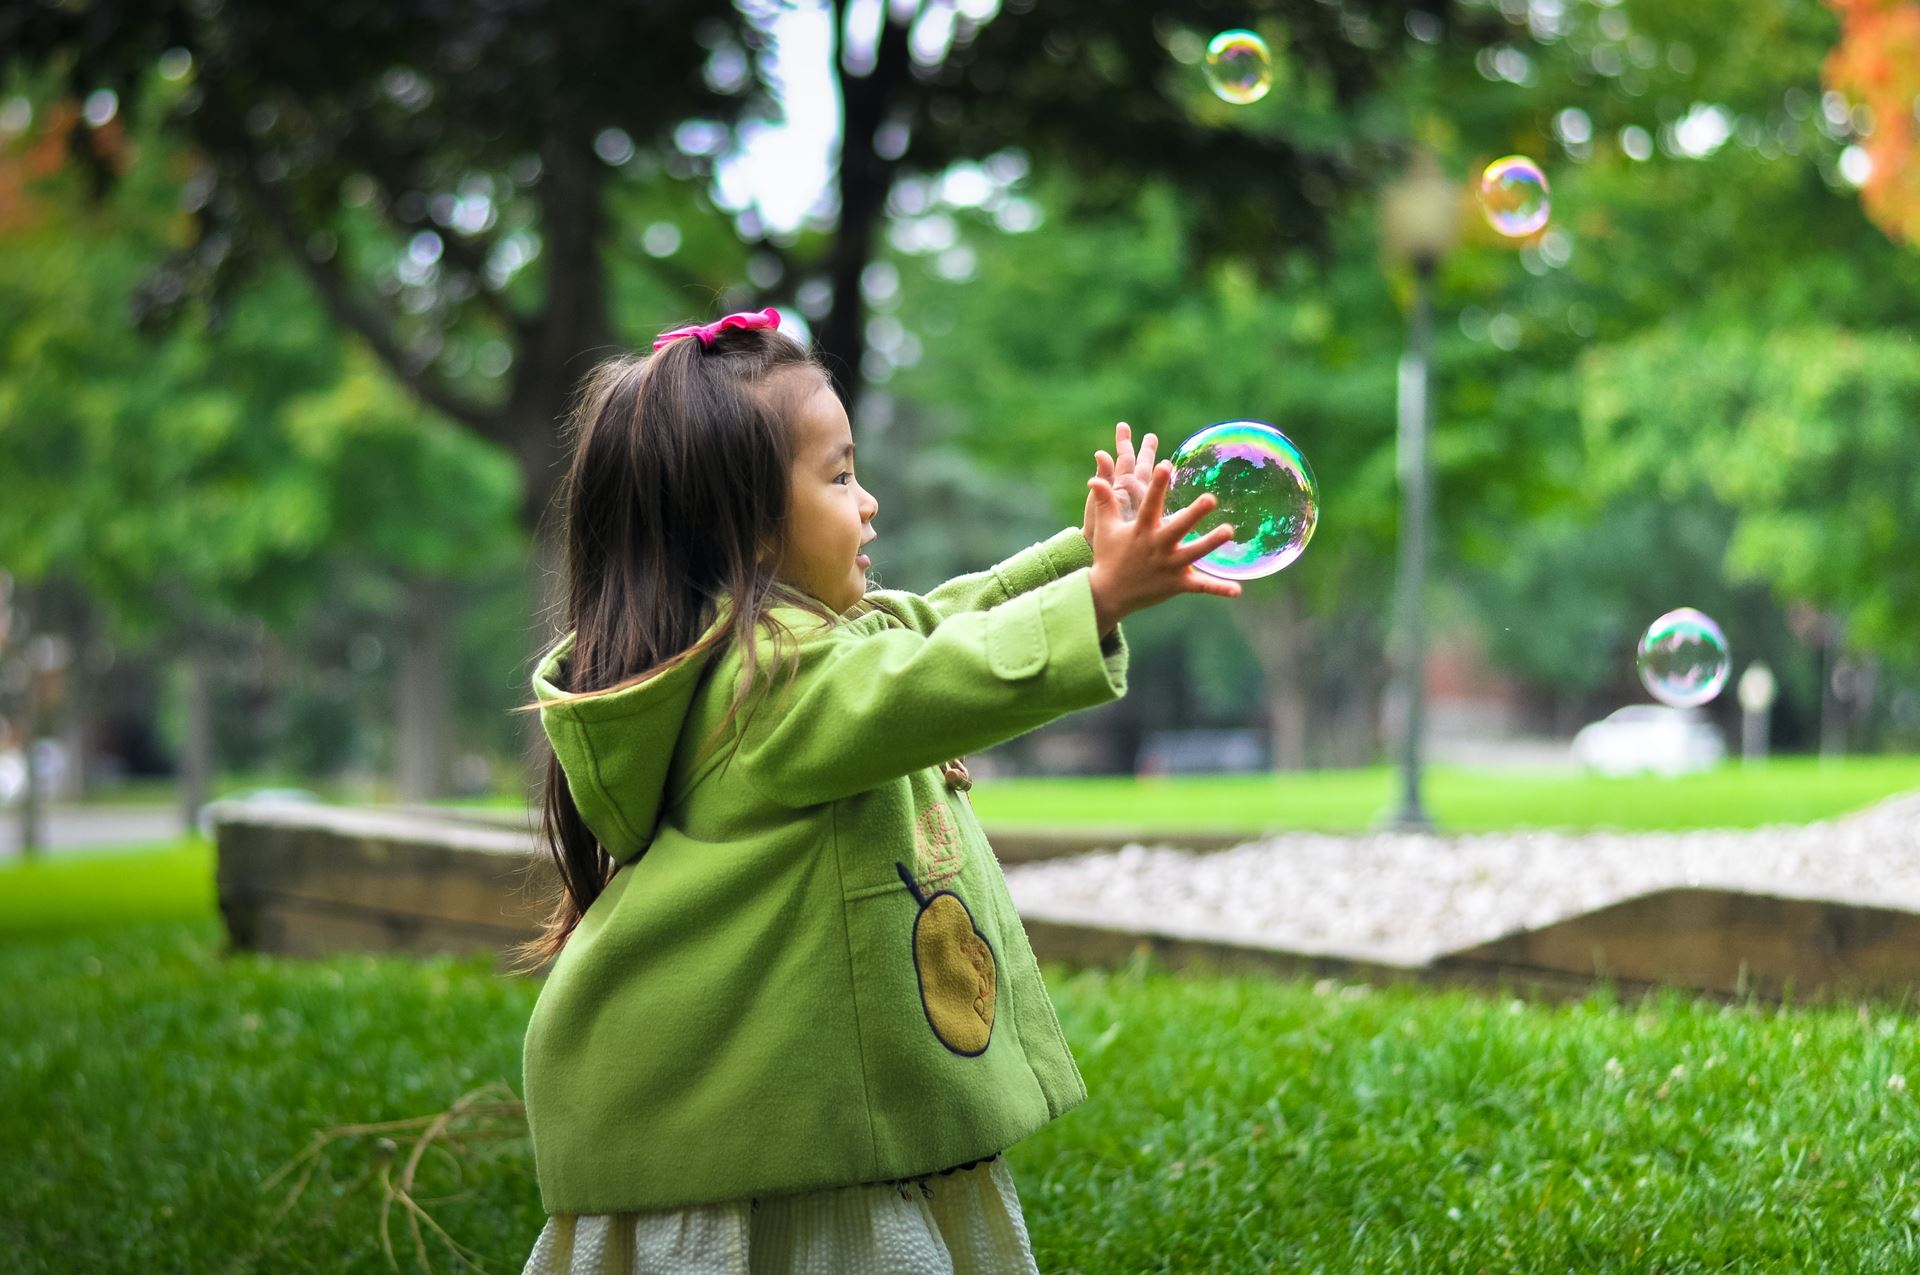 Child playing with bubble